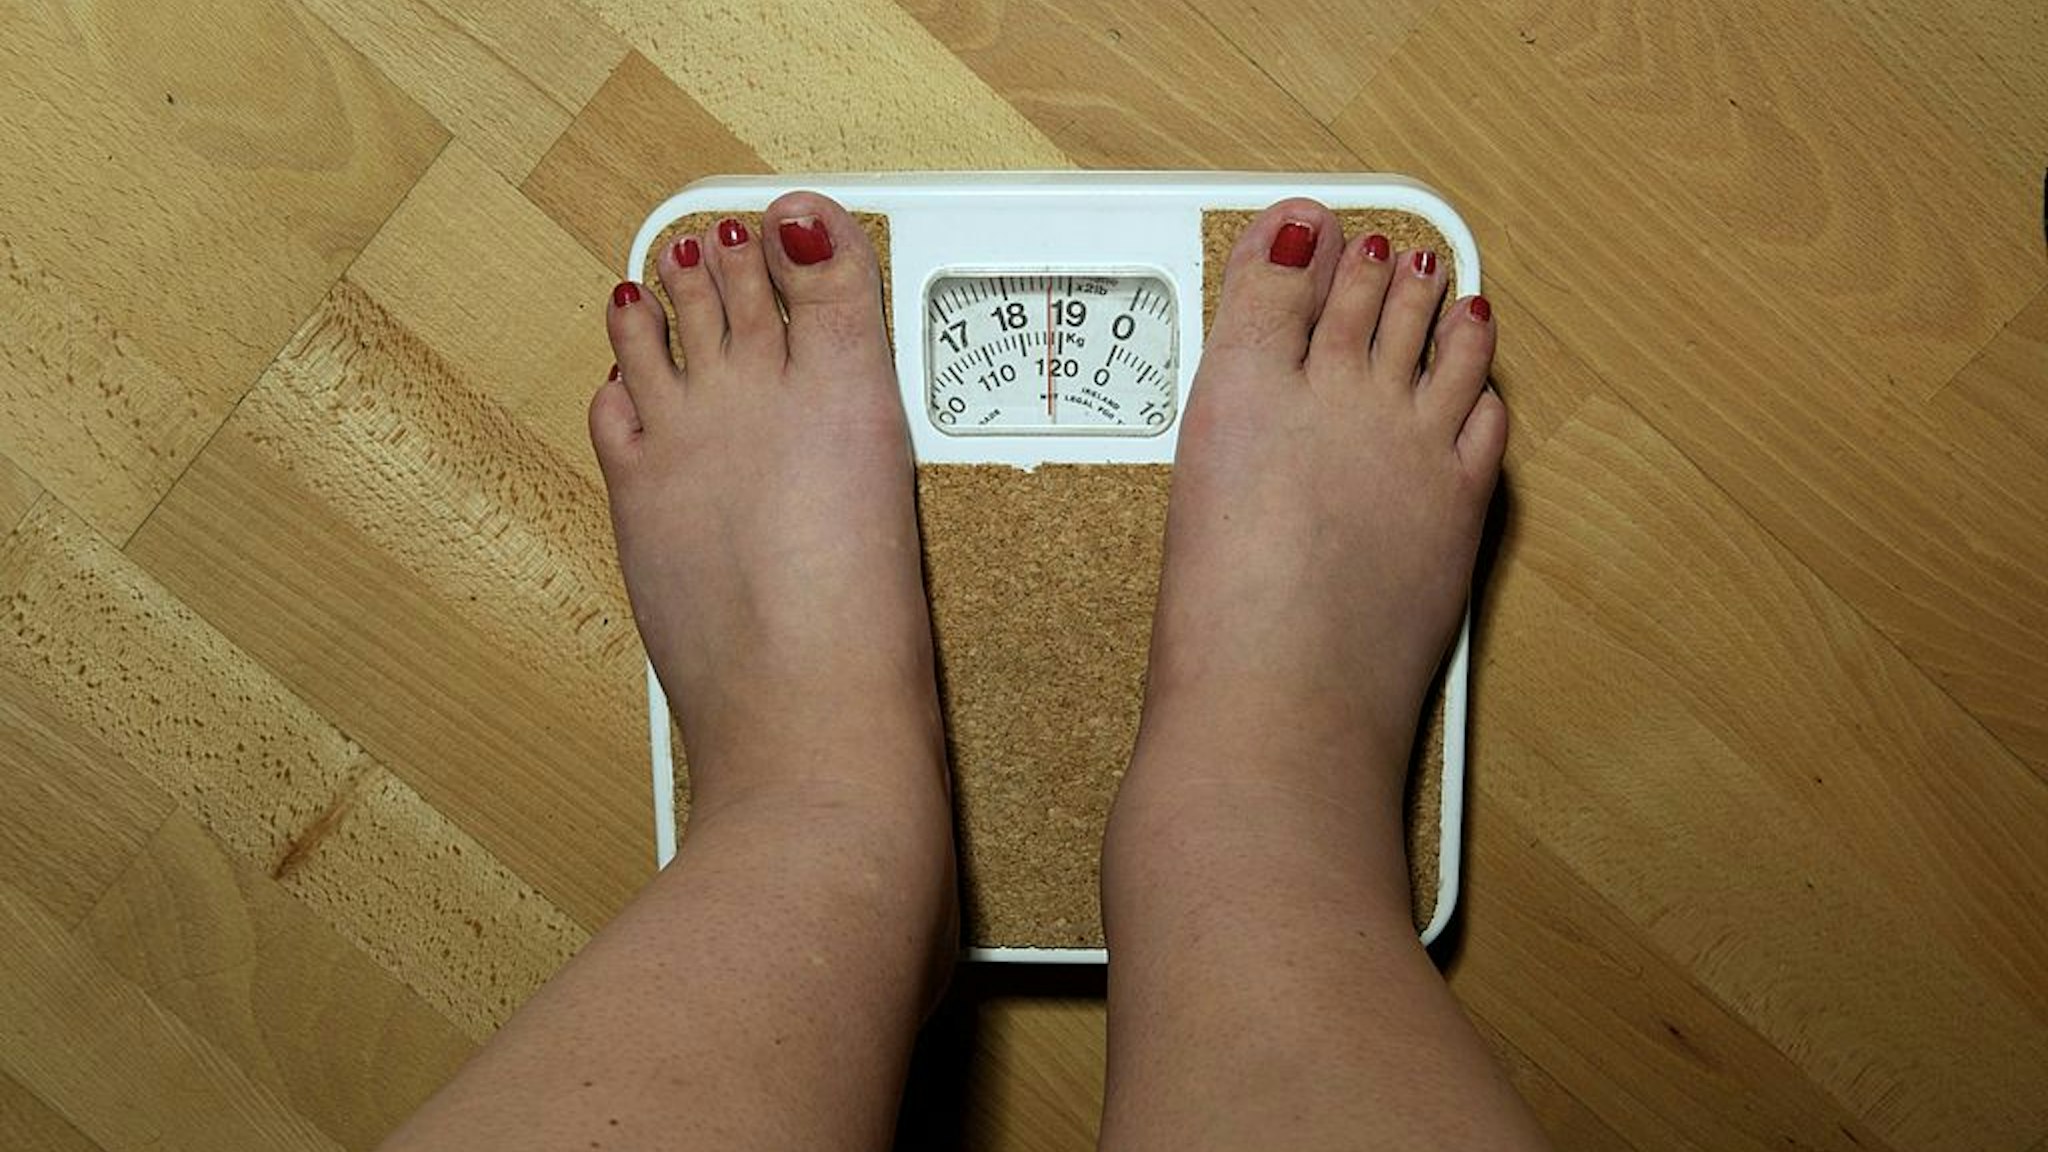 LONDON, ENGLAND - SEPTEMBER 2006: An anonymous woman, 42, on the scales before her weight loss surgery. The scales stop at 19 stone, but she weighs nearly 20 stone (126kg) and is severely obese. She hopes to lose around a third of her weight by having a gastric band fitted. (Photo by Tina Stallard/Getty Images)